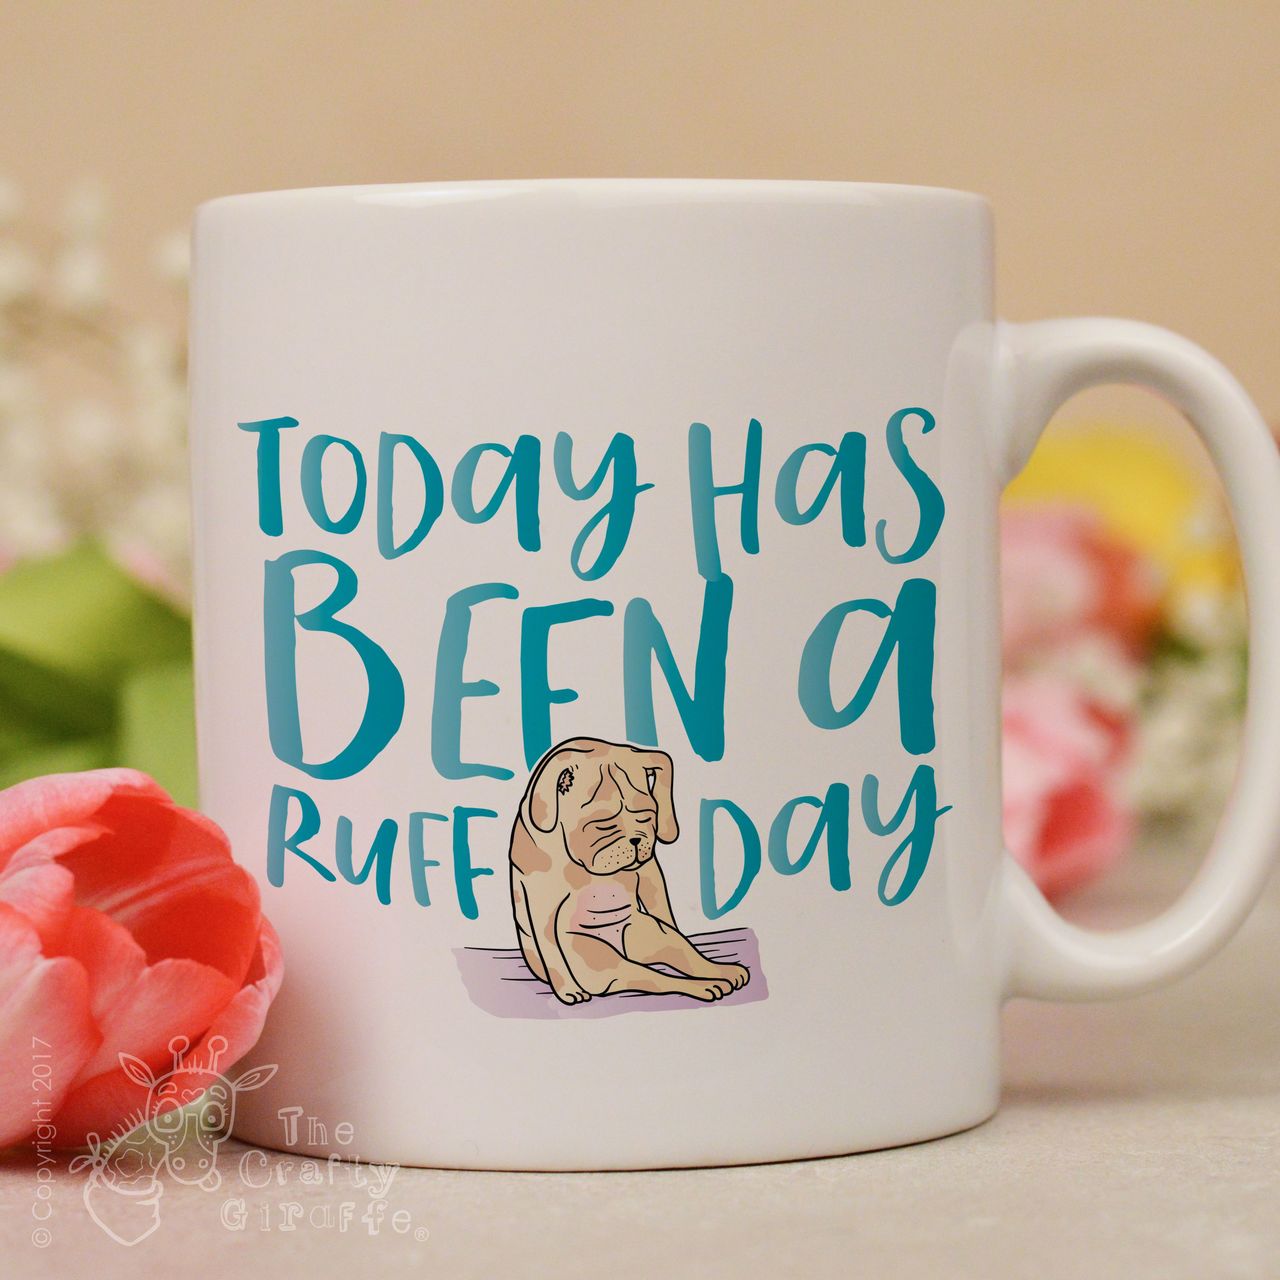 Today has been a ruff day mug